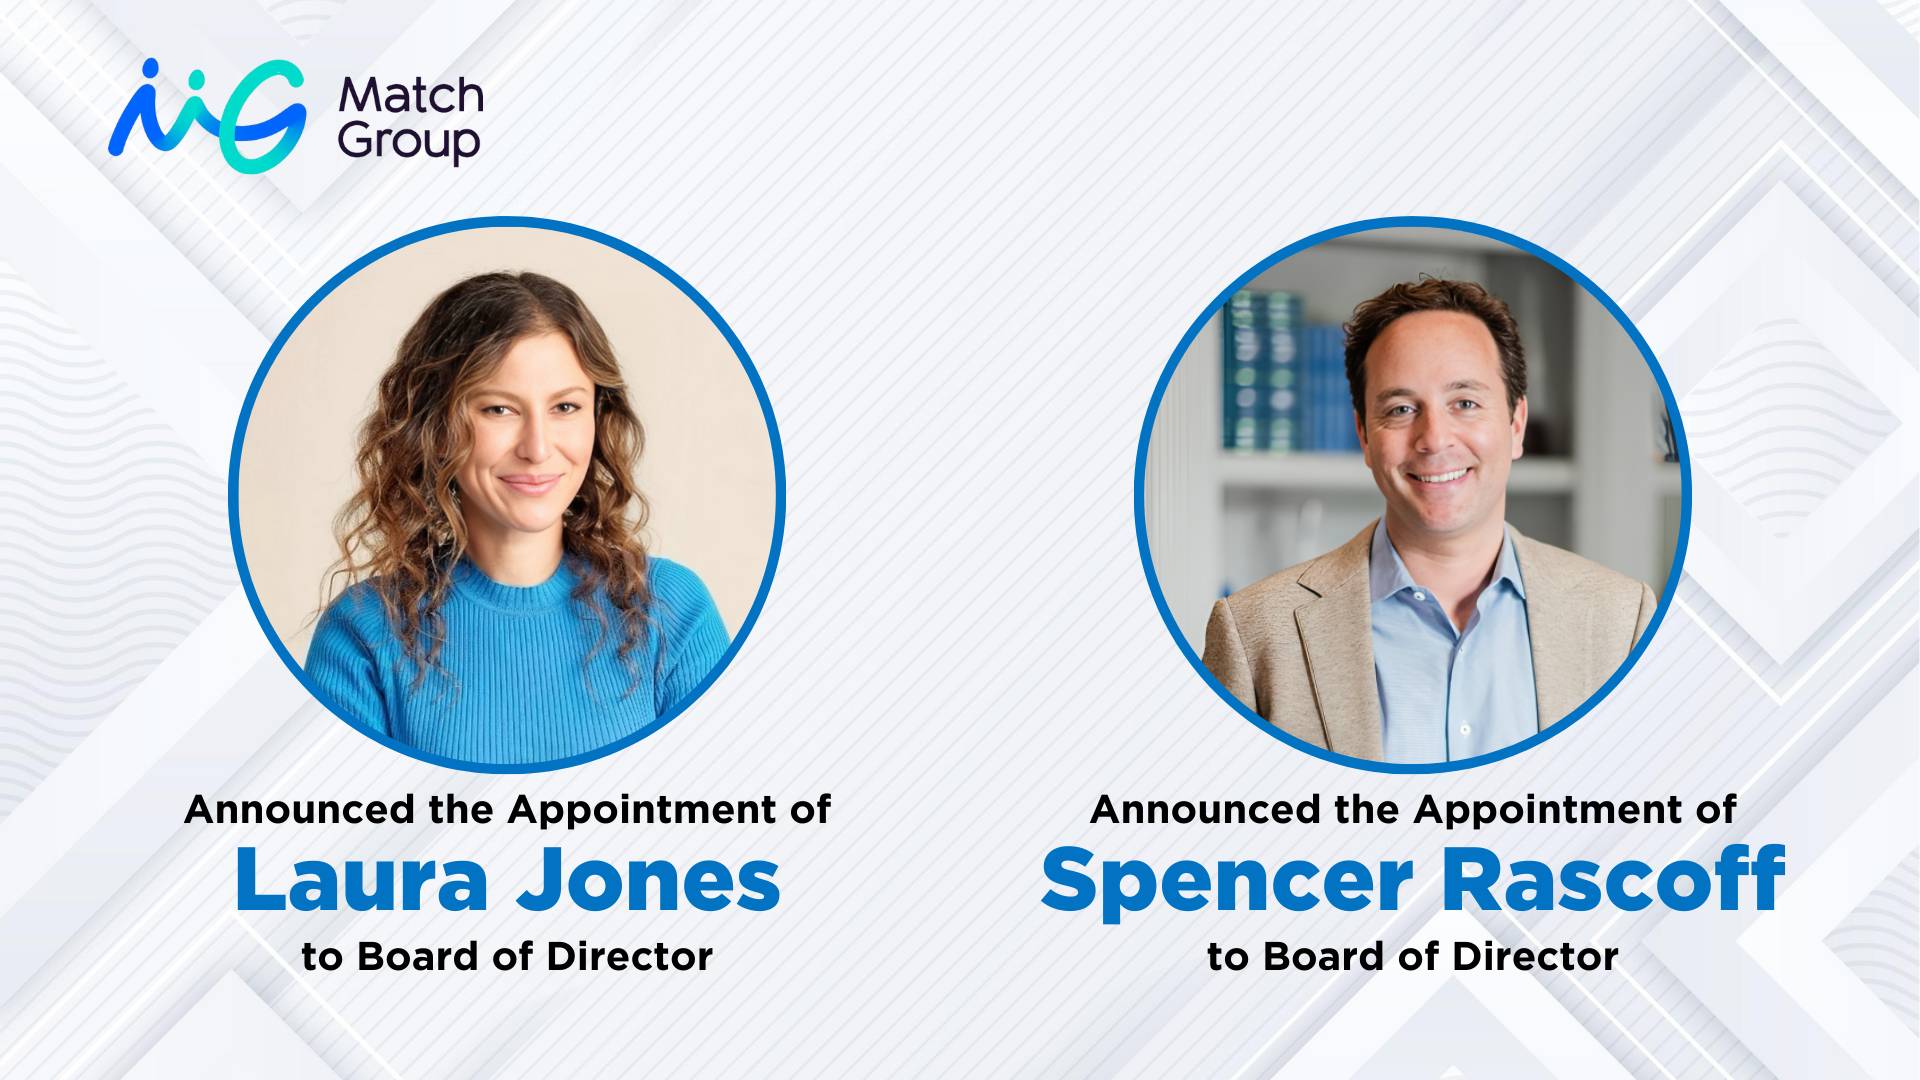 Match Group Appoints Laura Jones and Spencer Rascoff to Board of Directors